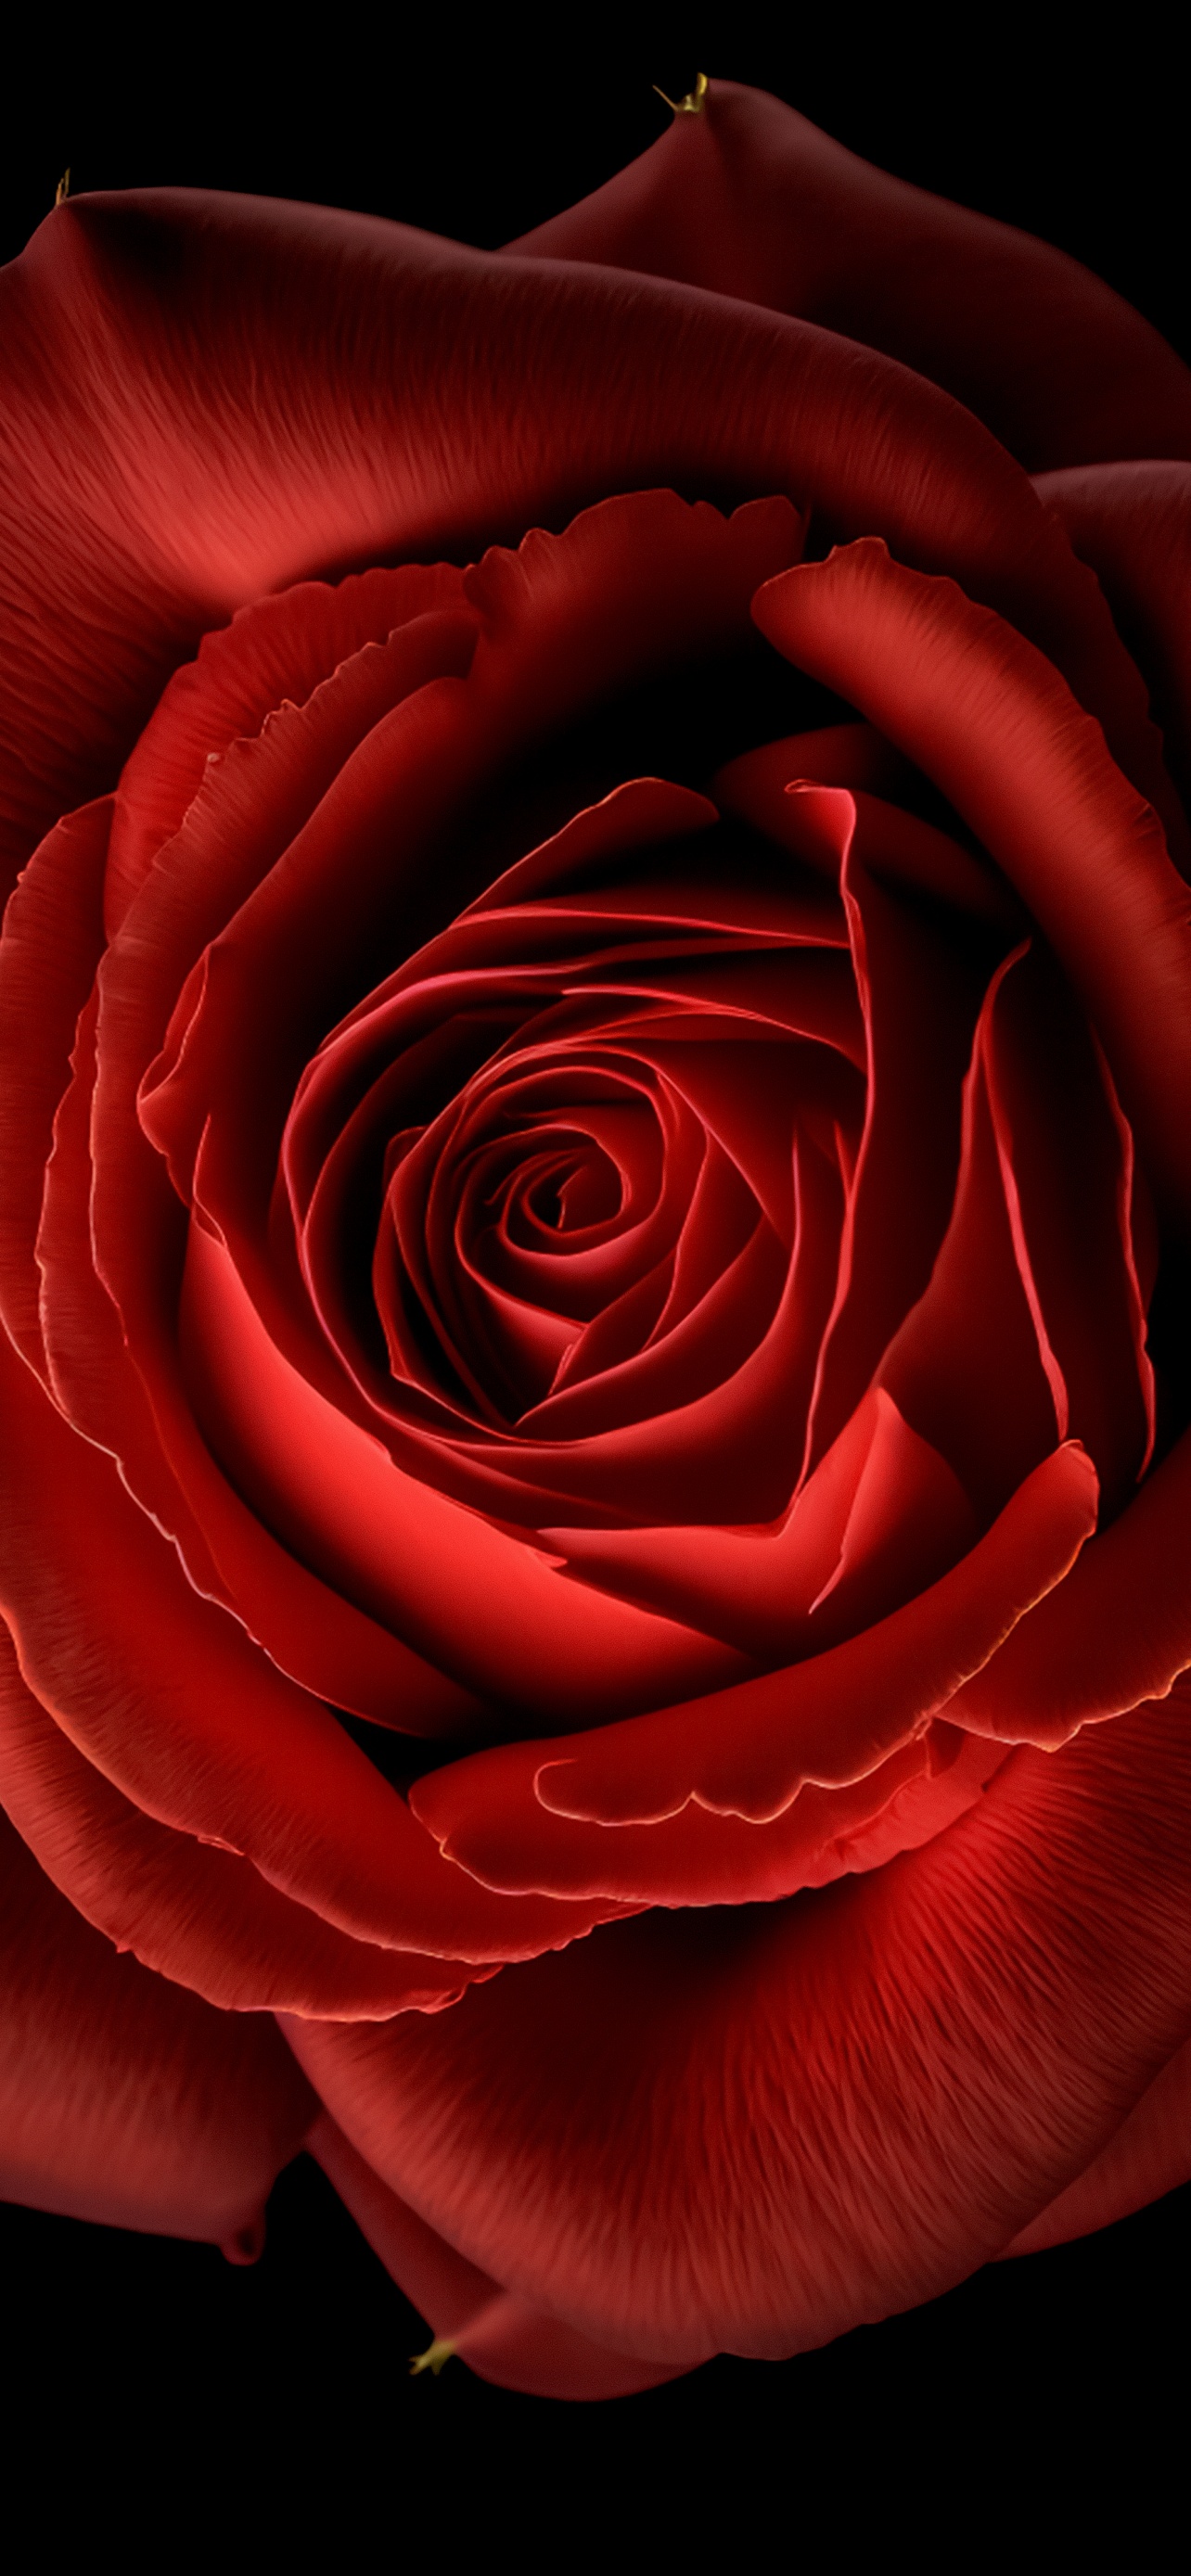 HD 4K dark red rose Wallpapers for Mobile